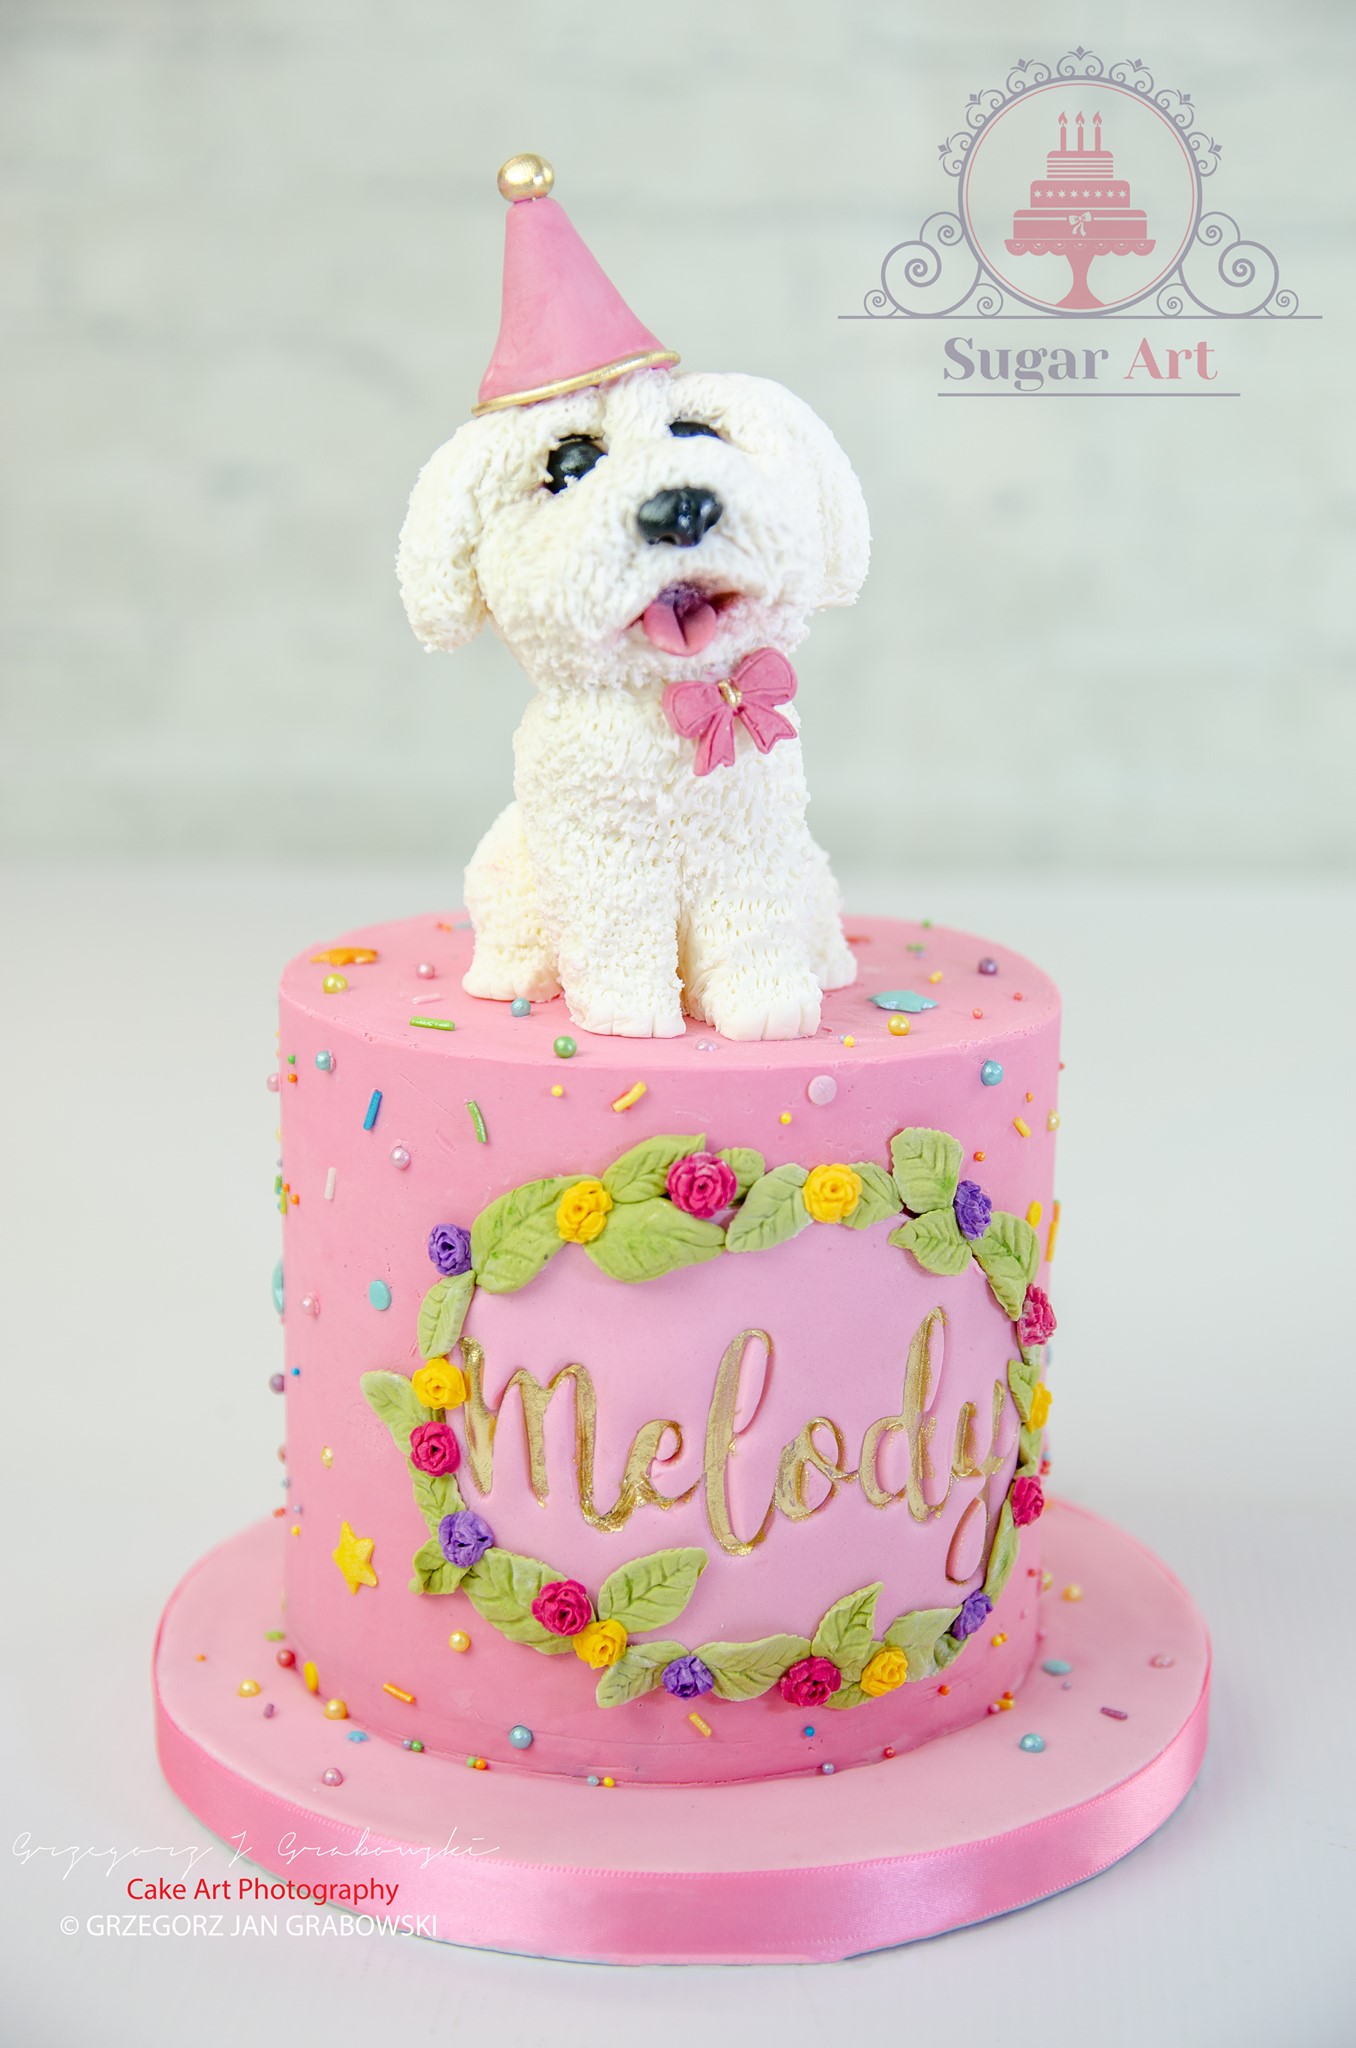 Our cake toppers – Sugar Art